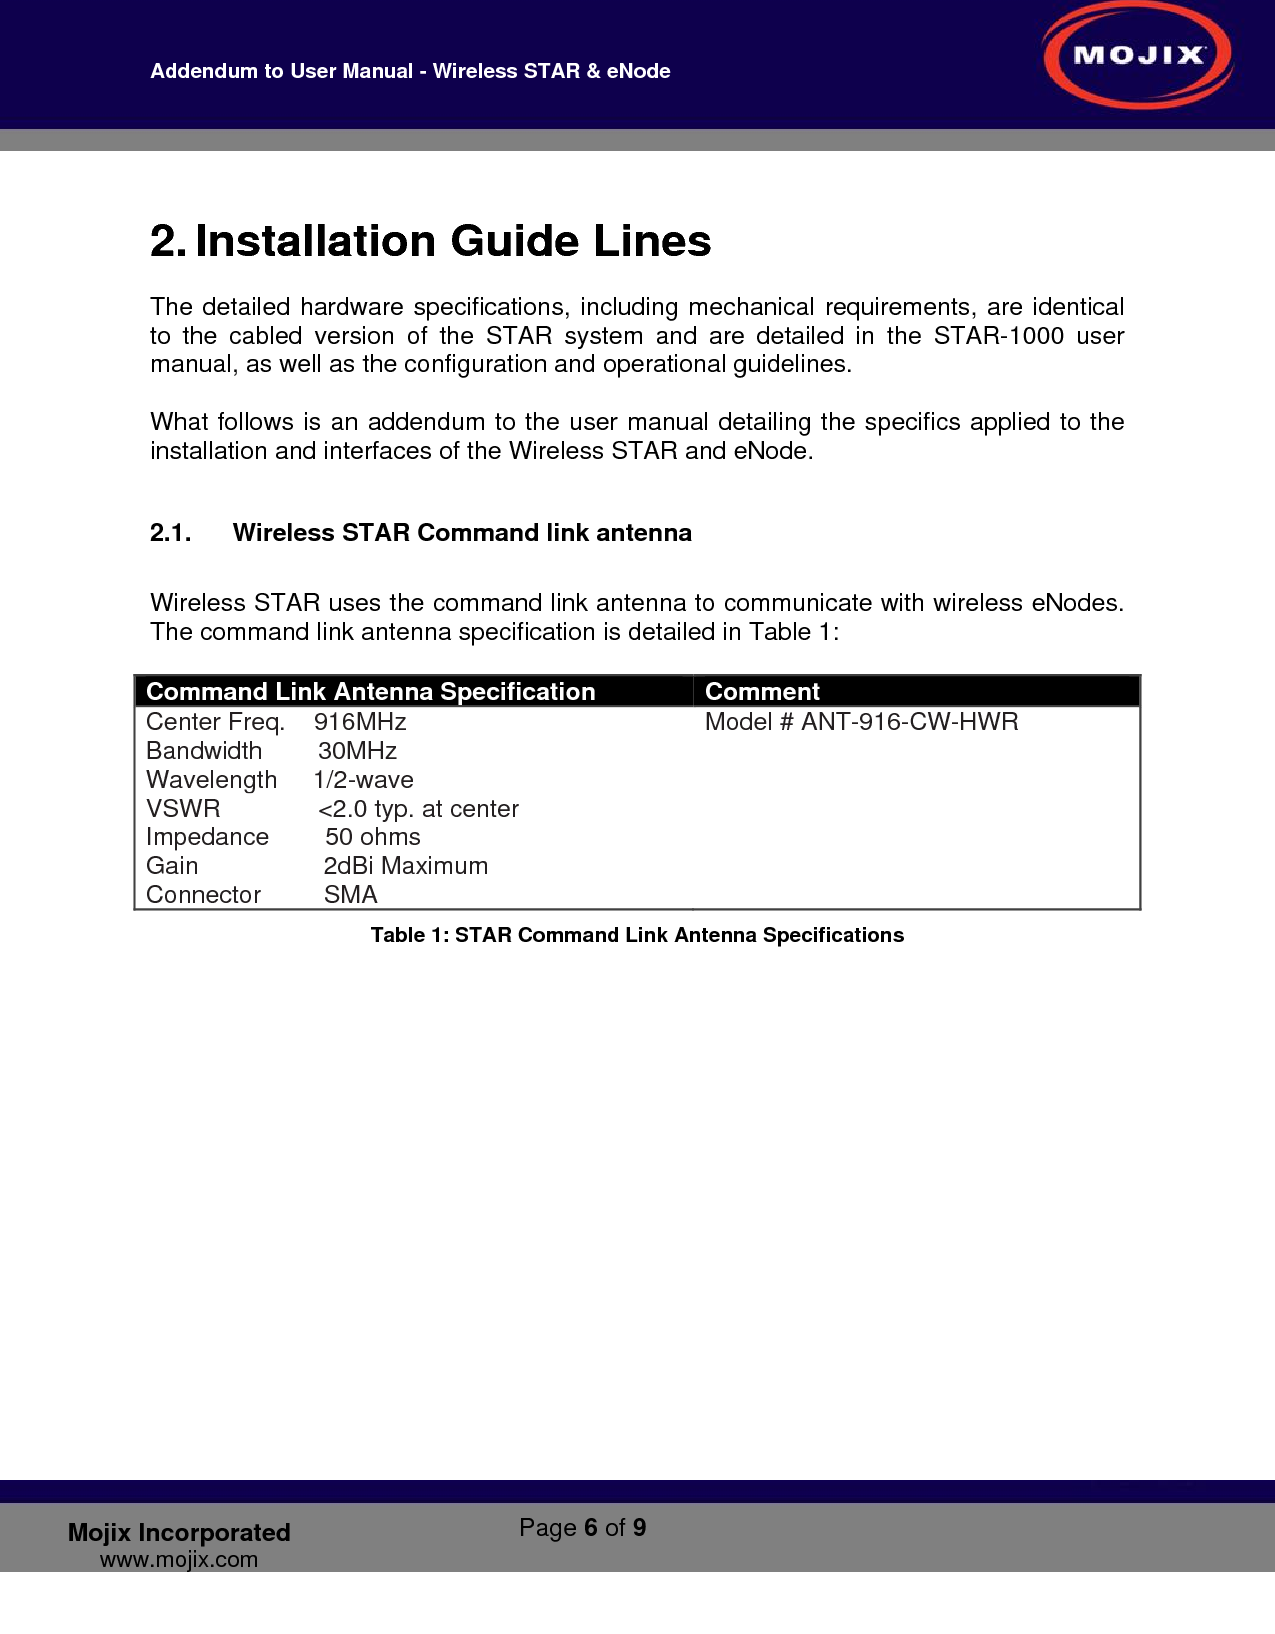 Addendum to User Manual - Wireless STAR &amp; eNode        Page 6 of 9   Mojix Incorporated www.mojix.com 2. Installation Guide Lines The detailed hardware specifications, including mechanical requirements, are identical to the cabled version of the STAR system and are detailed in the STAR-1000 user manual, as well as the configuration and operational guidelines.   What follows is an addendum to the user manual detailing the specifics applied to the installation and interfaces of the Wireless STAR and eNode.  2.1.  Wireless STAR Command link antenna  Wireless STAR uses the command link antenna to communicate with wireless eNodes. The command link antenna specification is detailed in Table 1:  Command Link Antenna Specification  Comment Center Freq.    916MHz Bandwidth        30MHz Wavelength     1/2-wave VSWR              &lt;2.0 typ. at center Impedance        50 ohms Gain                  2dBi Maximum Connector         SMA Model # ANT-916-CW-HWR Table 1: STAR Command Link Antenna Specifications 